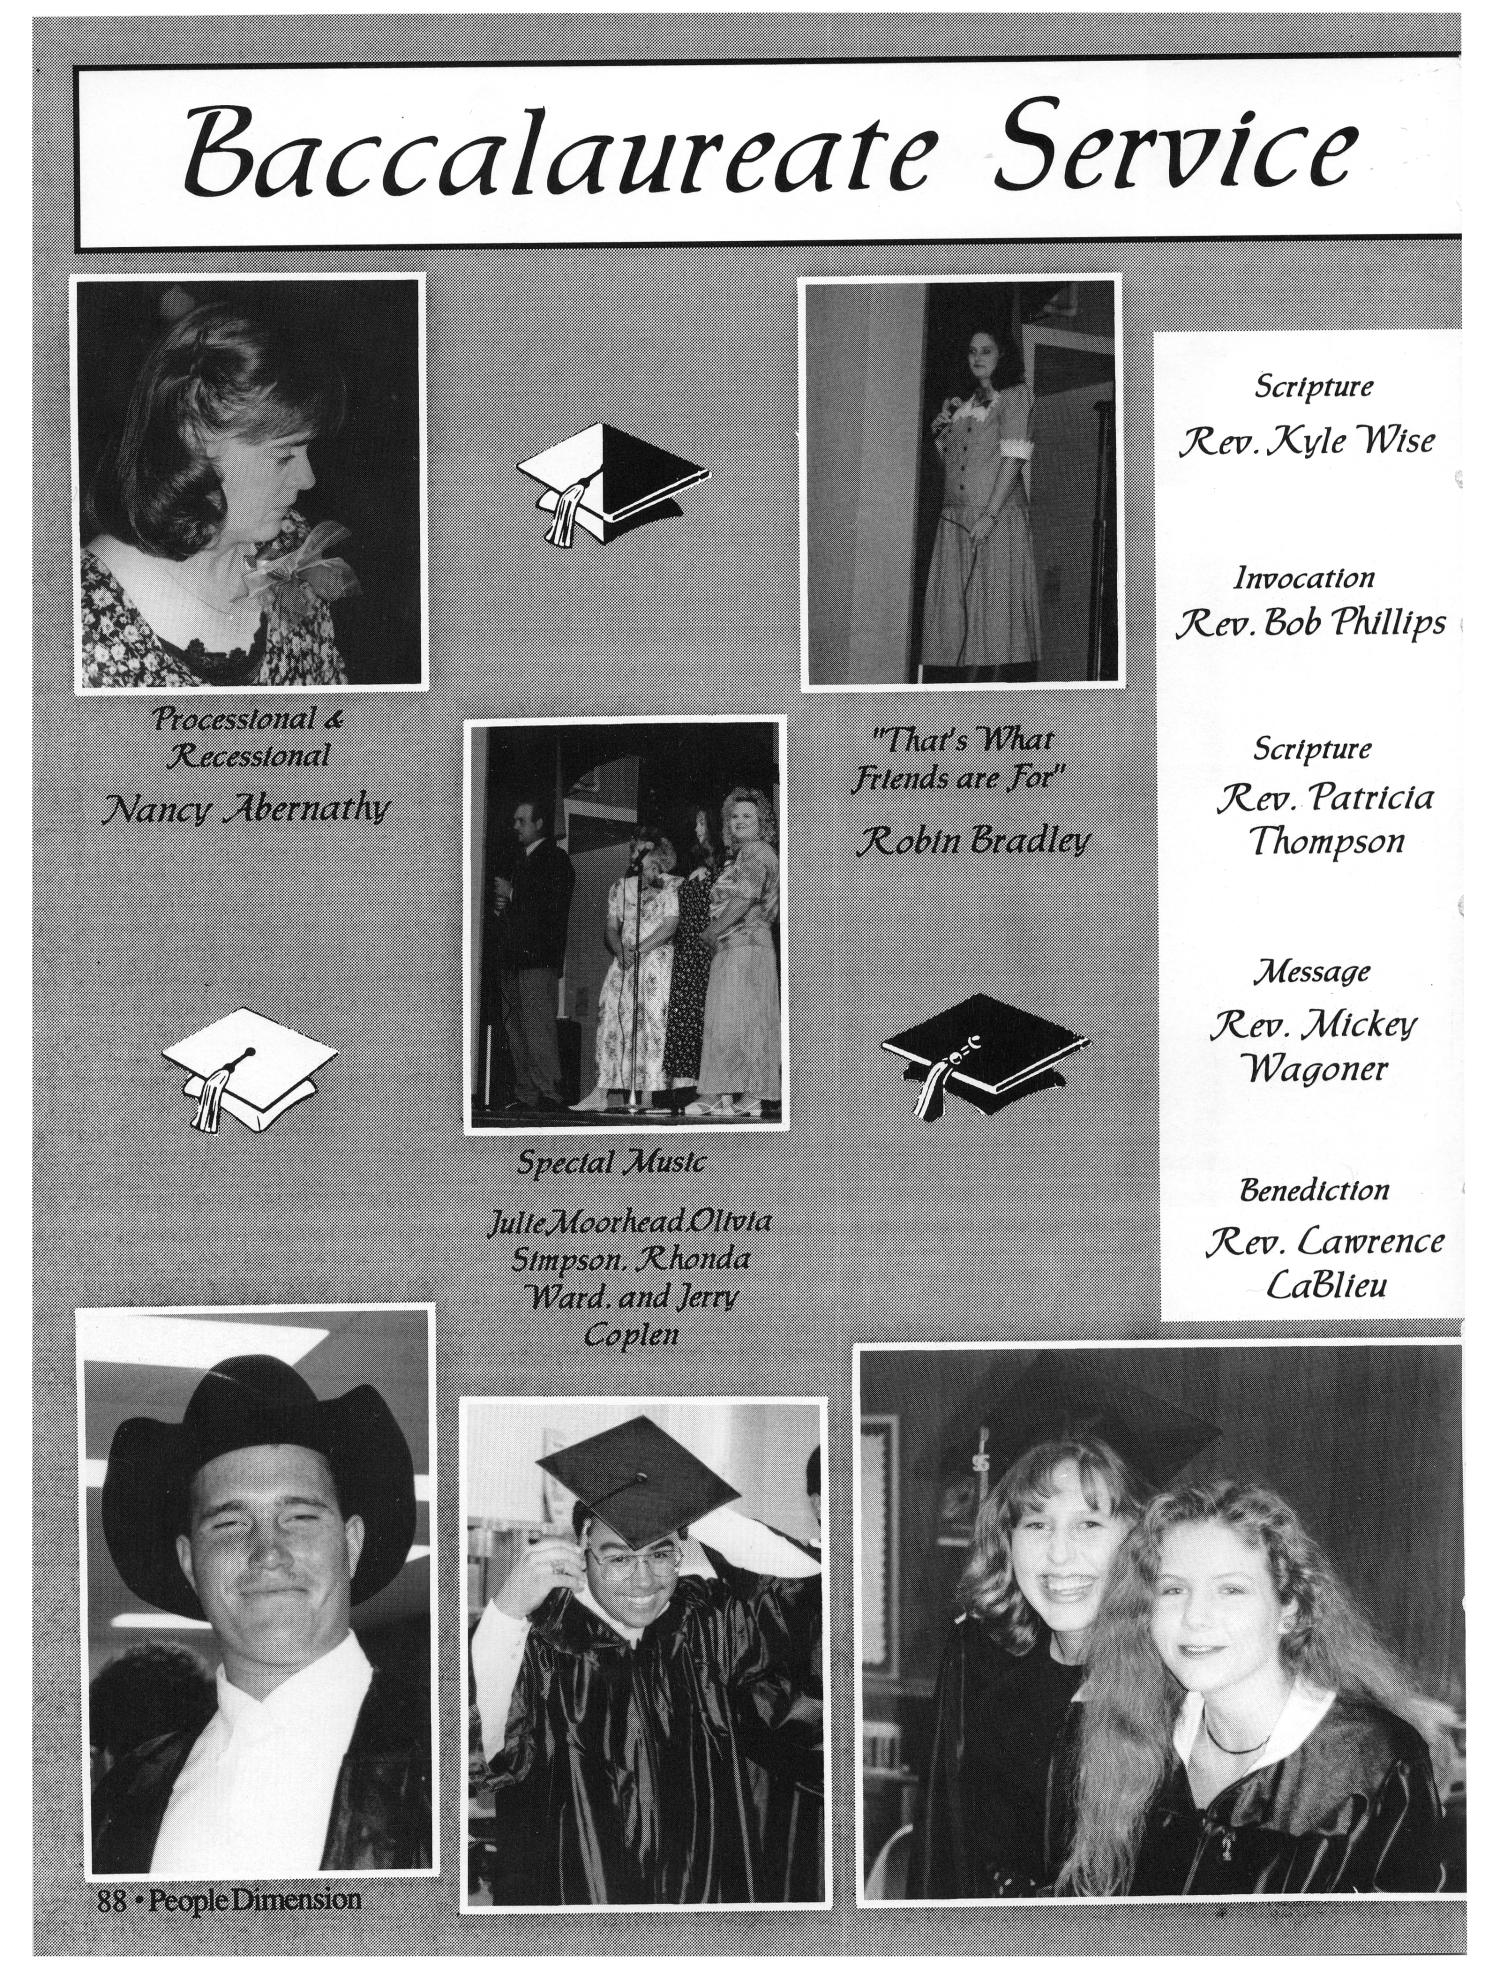 The Hornet, Yearbook of Aspermont Students, 1995
                                                
                                                    88
                                                